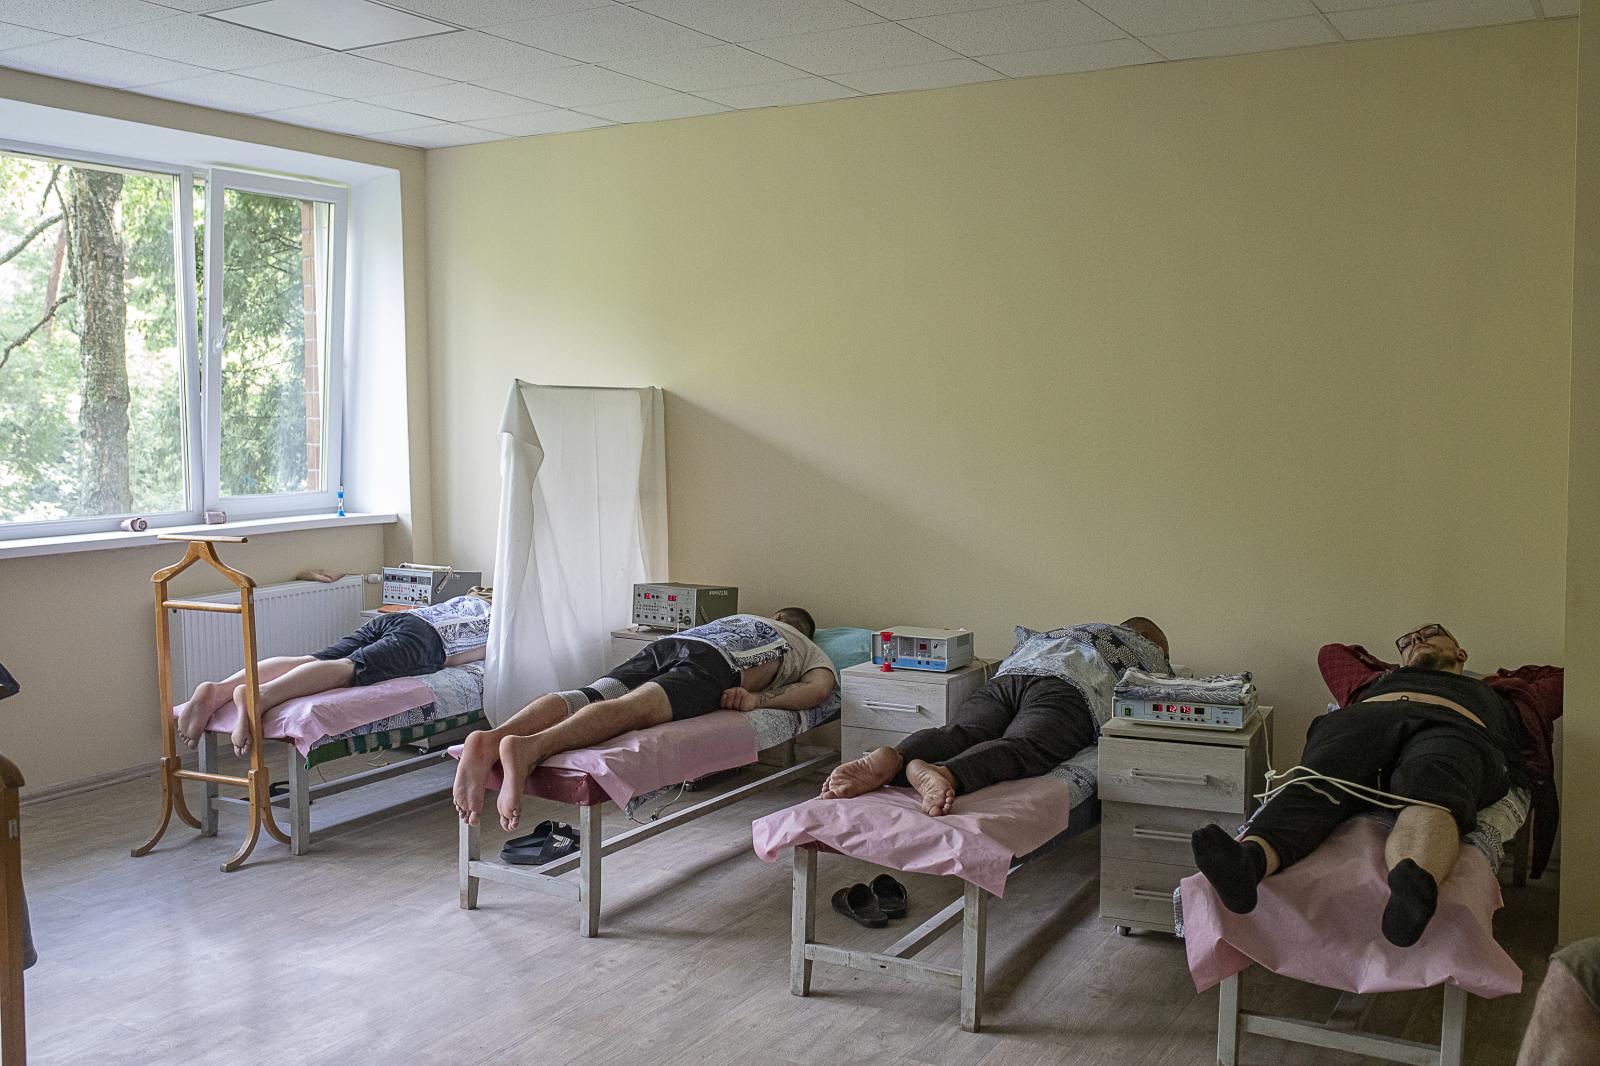 Walking wounded: a journey of recovery and hope - KYIV OBLAST, UKRAINE - JULY 21: Four soldiers lying on as...